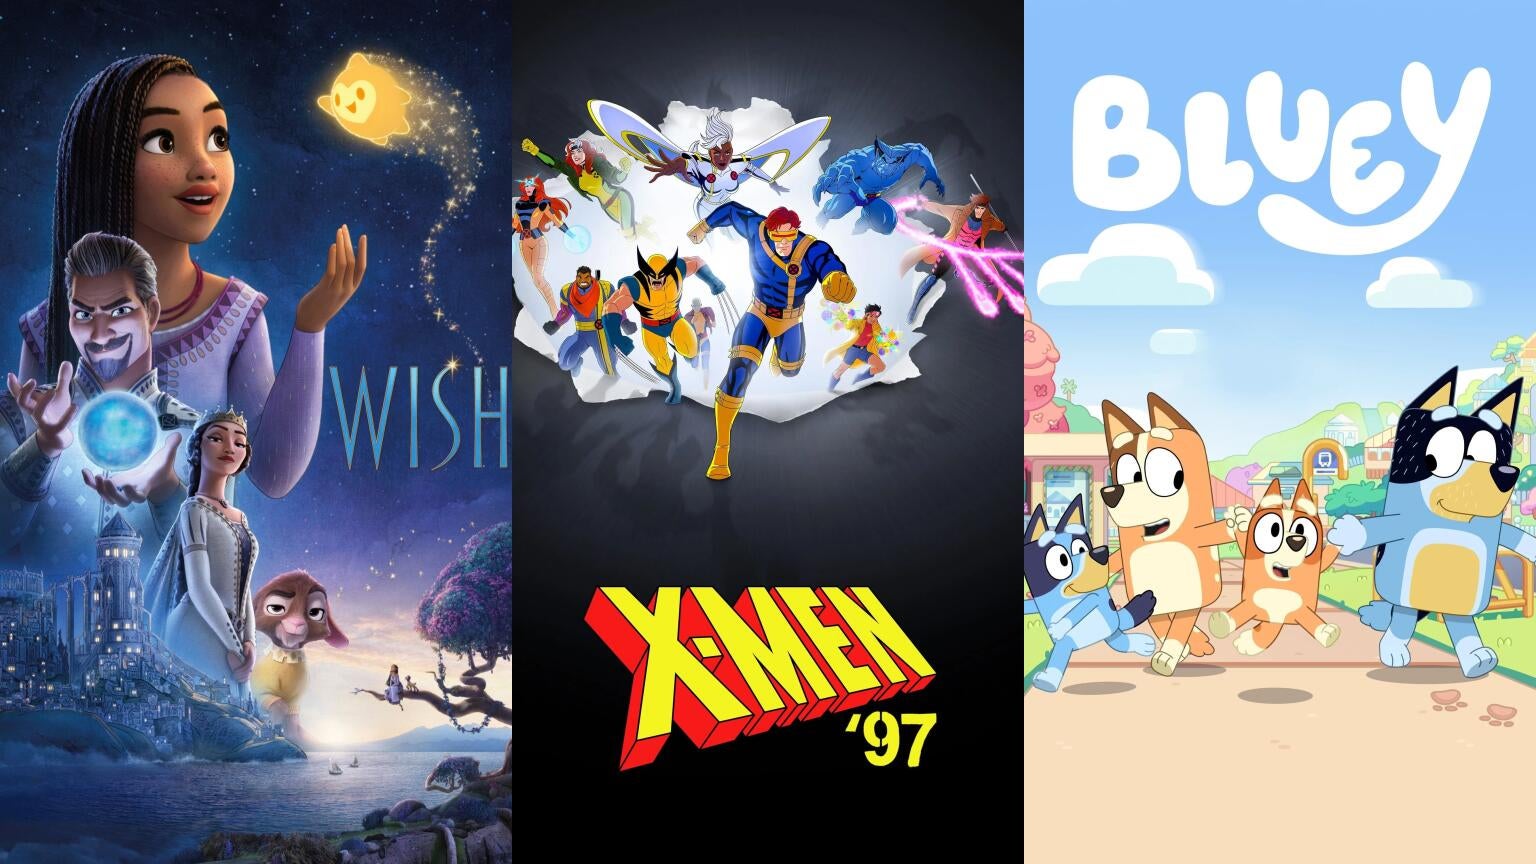 Posters for Disney's "Wish," "X-Men '97," and "Bluey"